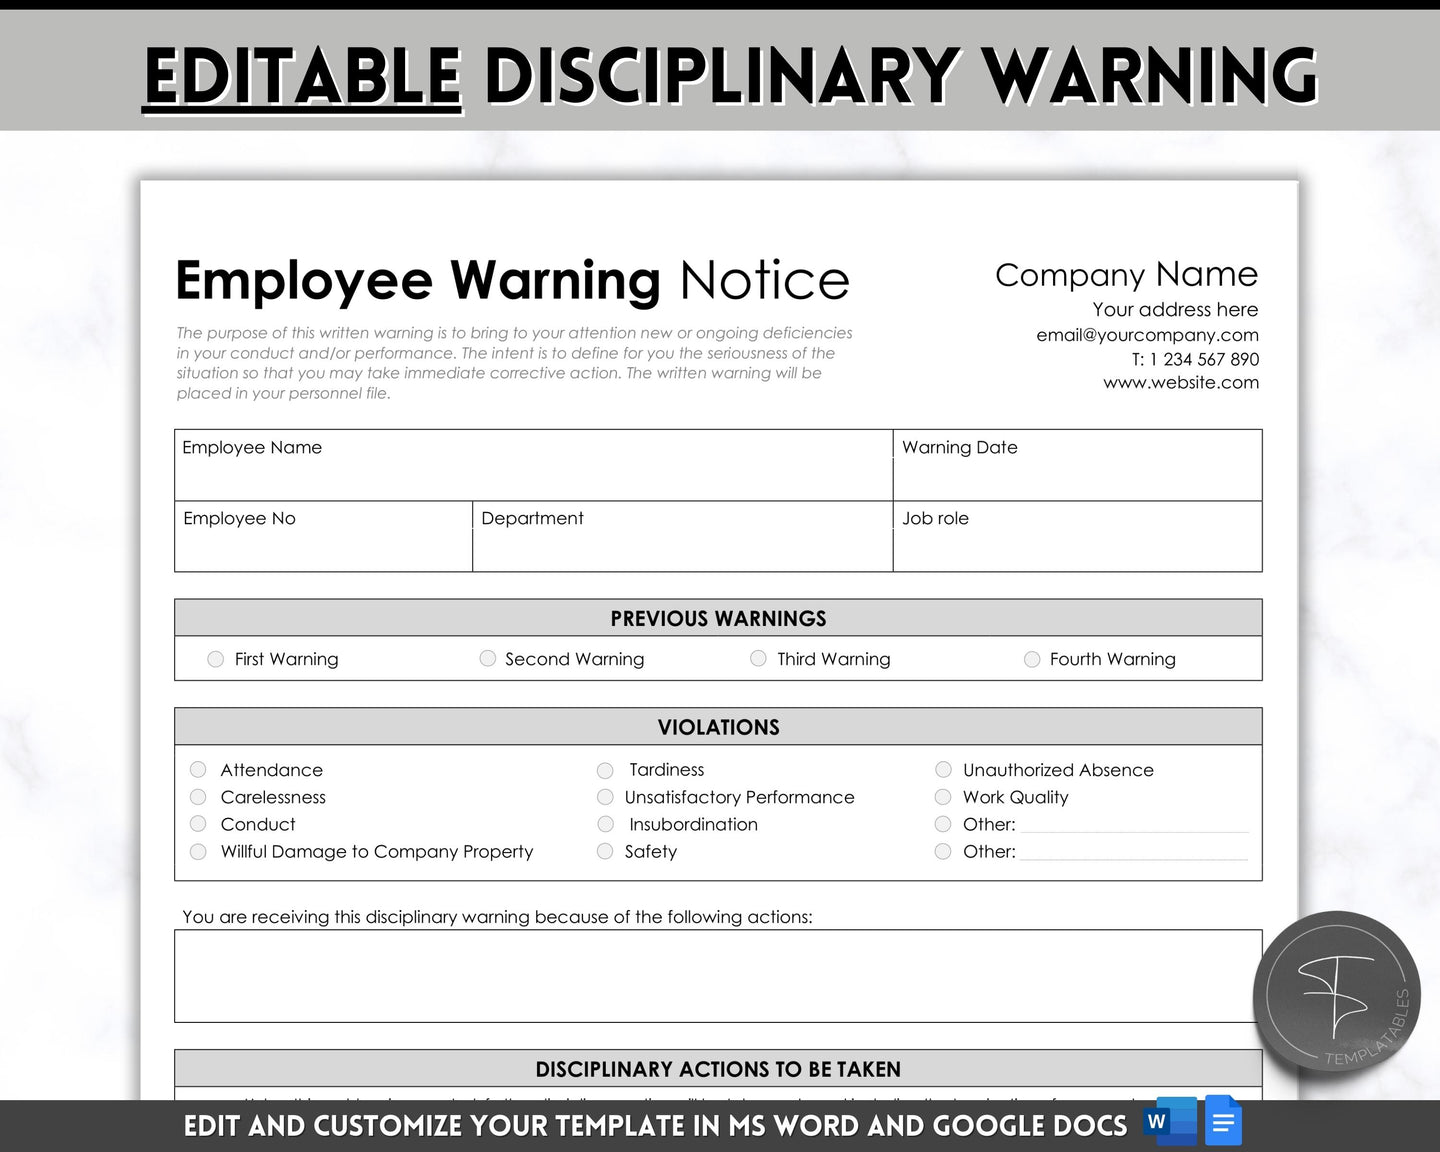 Employee Disciplinary Form | EDITABLE Warning Notice for Small Business Human Resources | Employee Write Up, HR Performance Discipline Forms